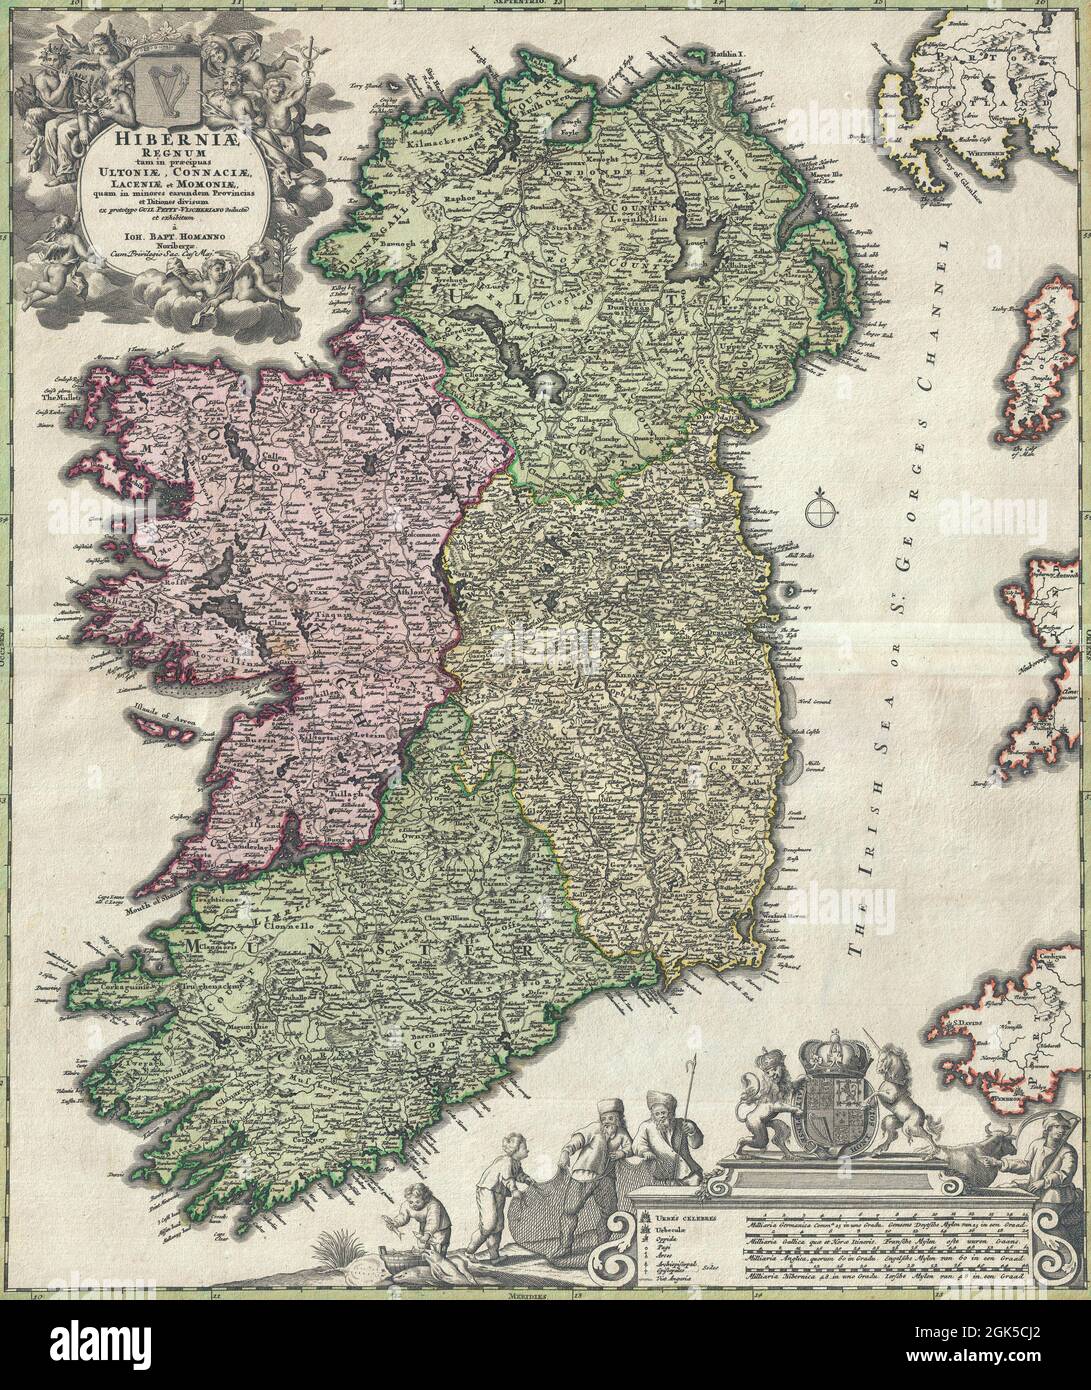 ancient map of Ireland (1716) by Homann Stock Photo